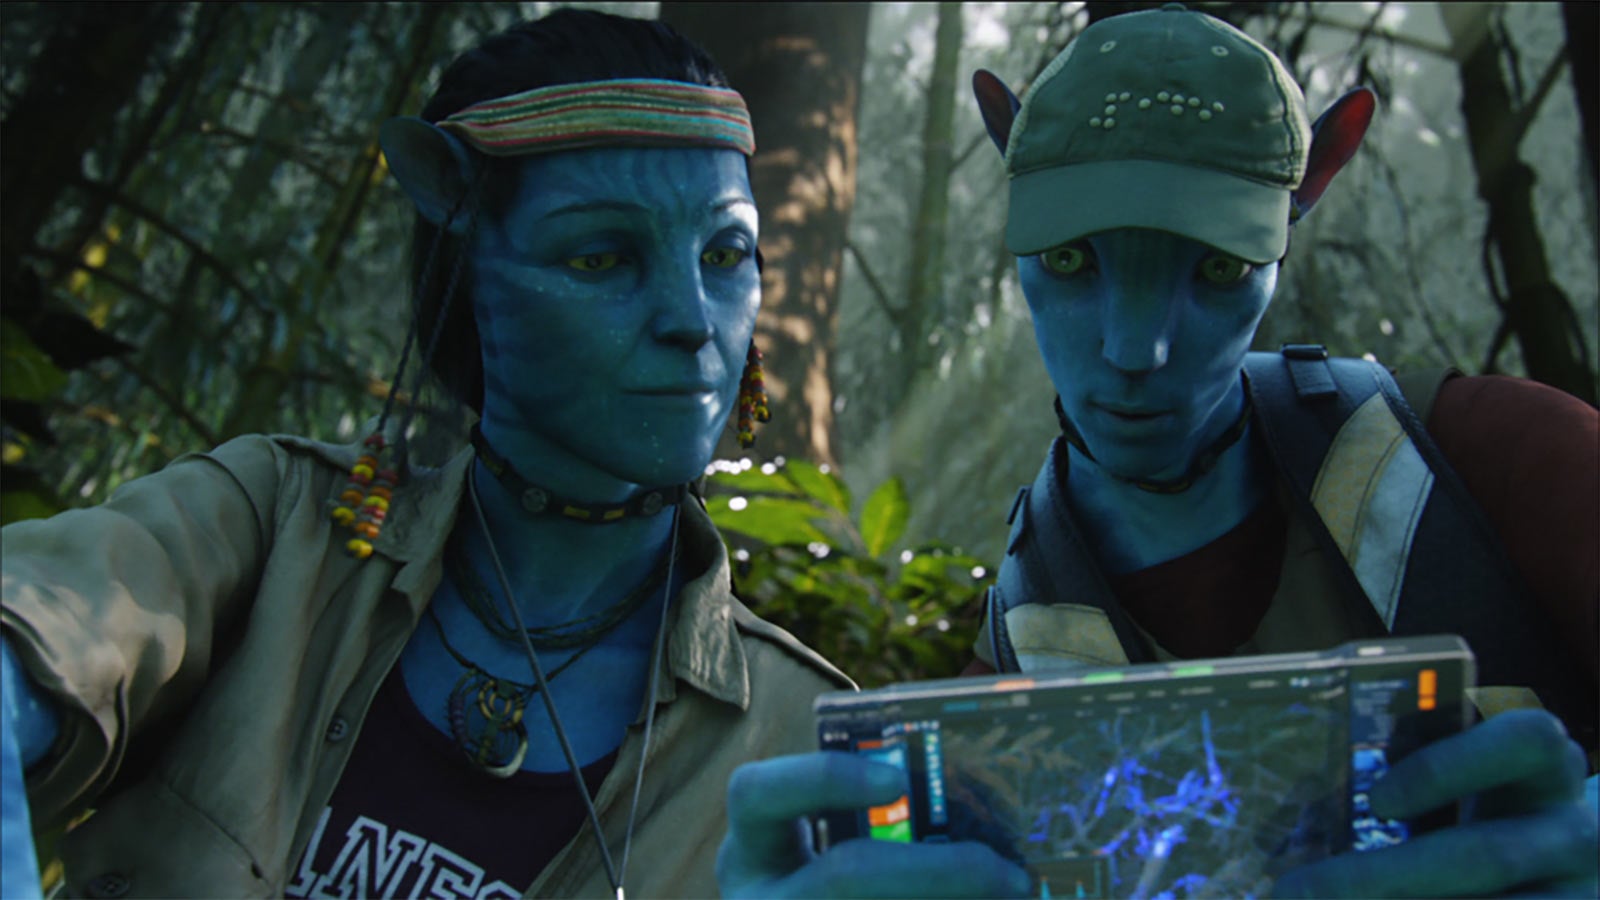 Two alien scientists are examining plant life.